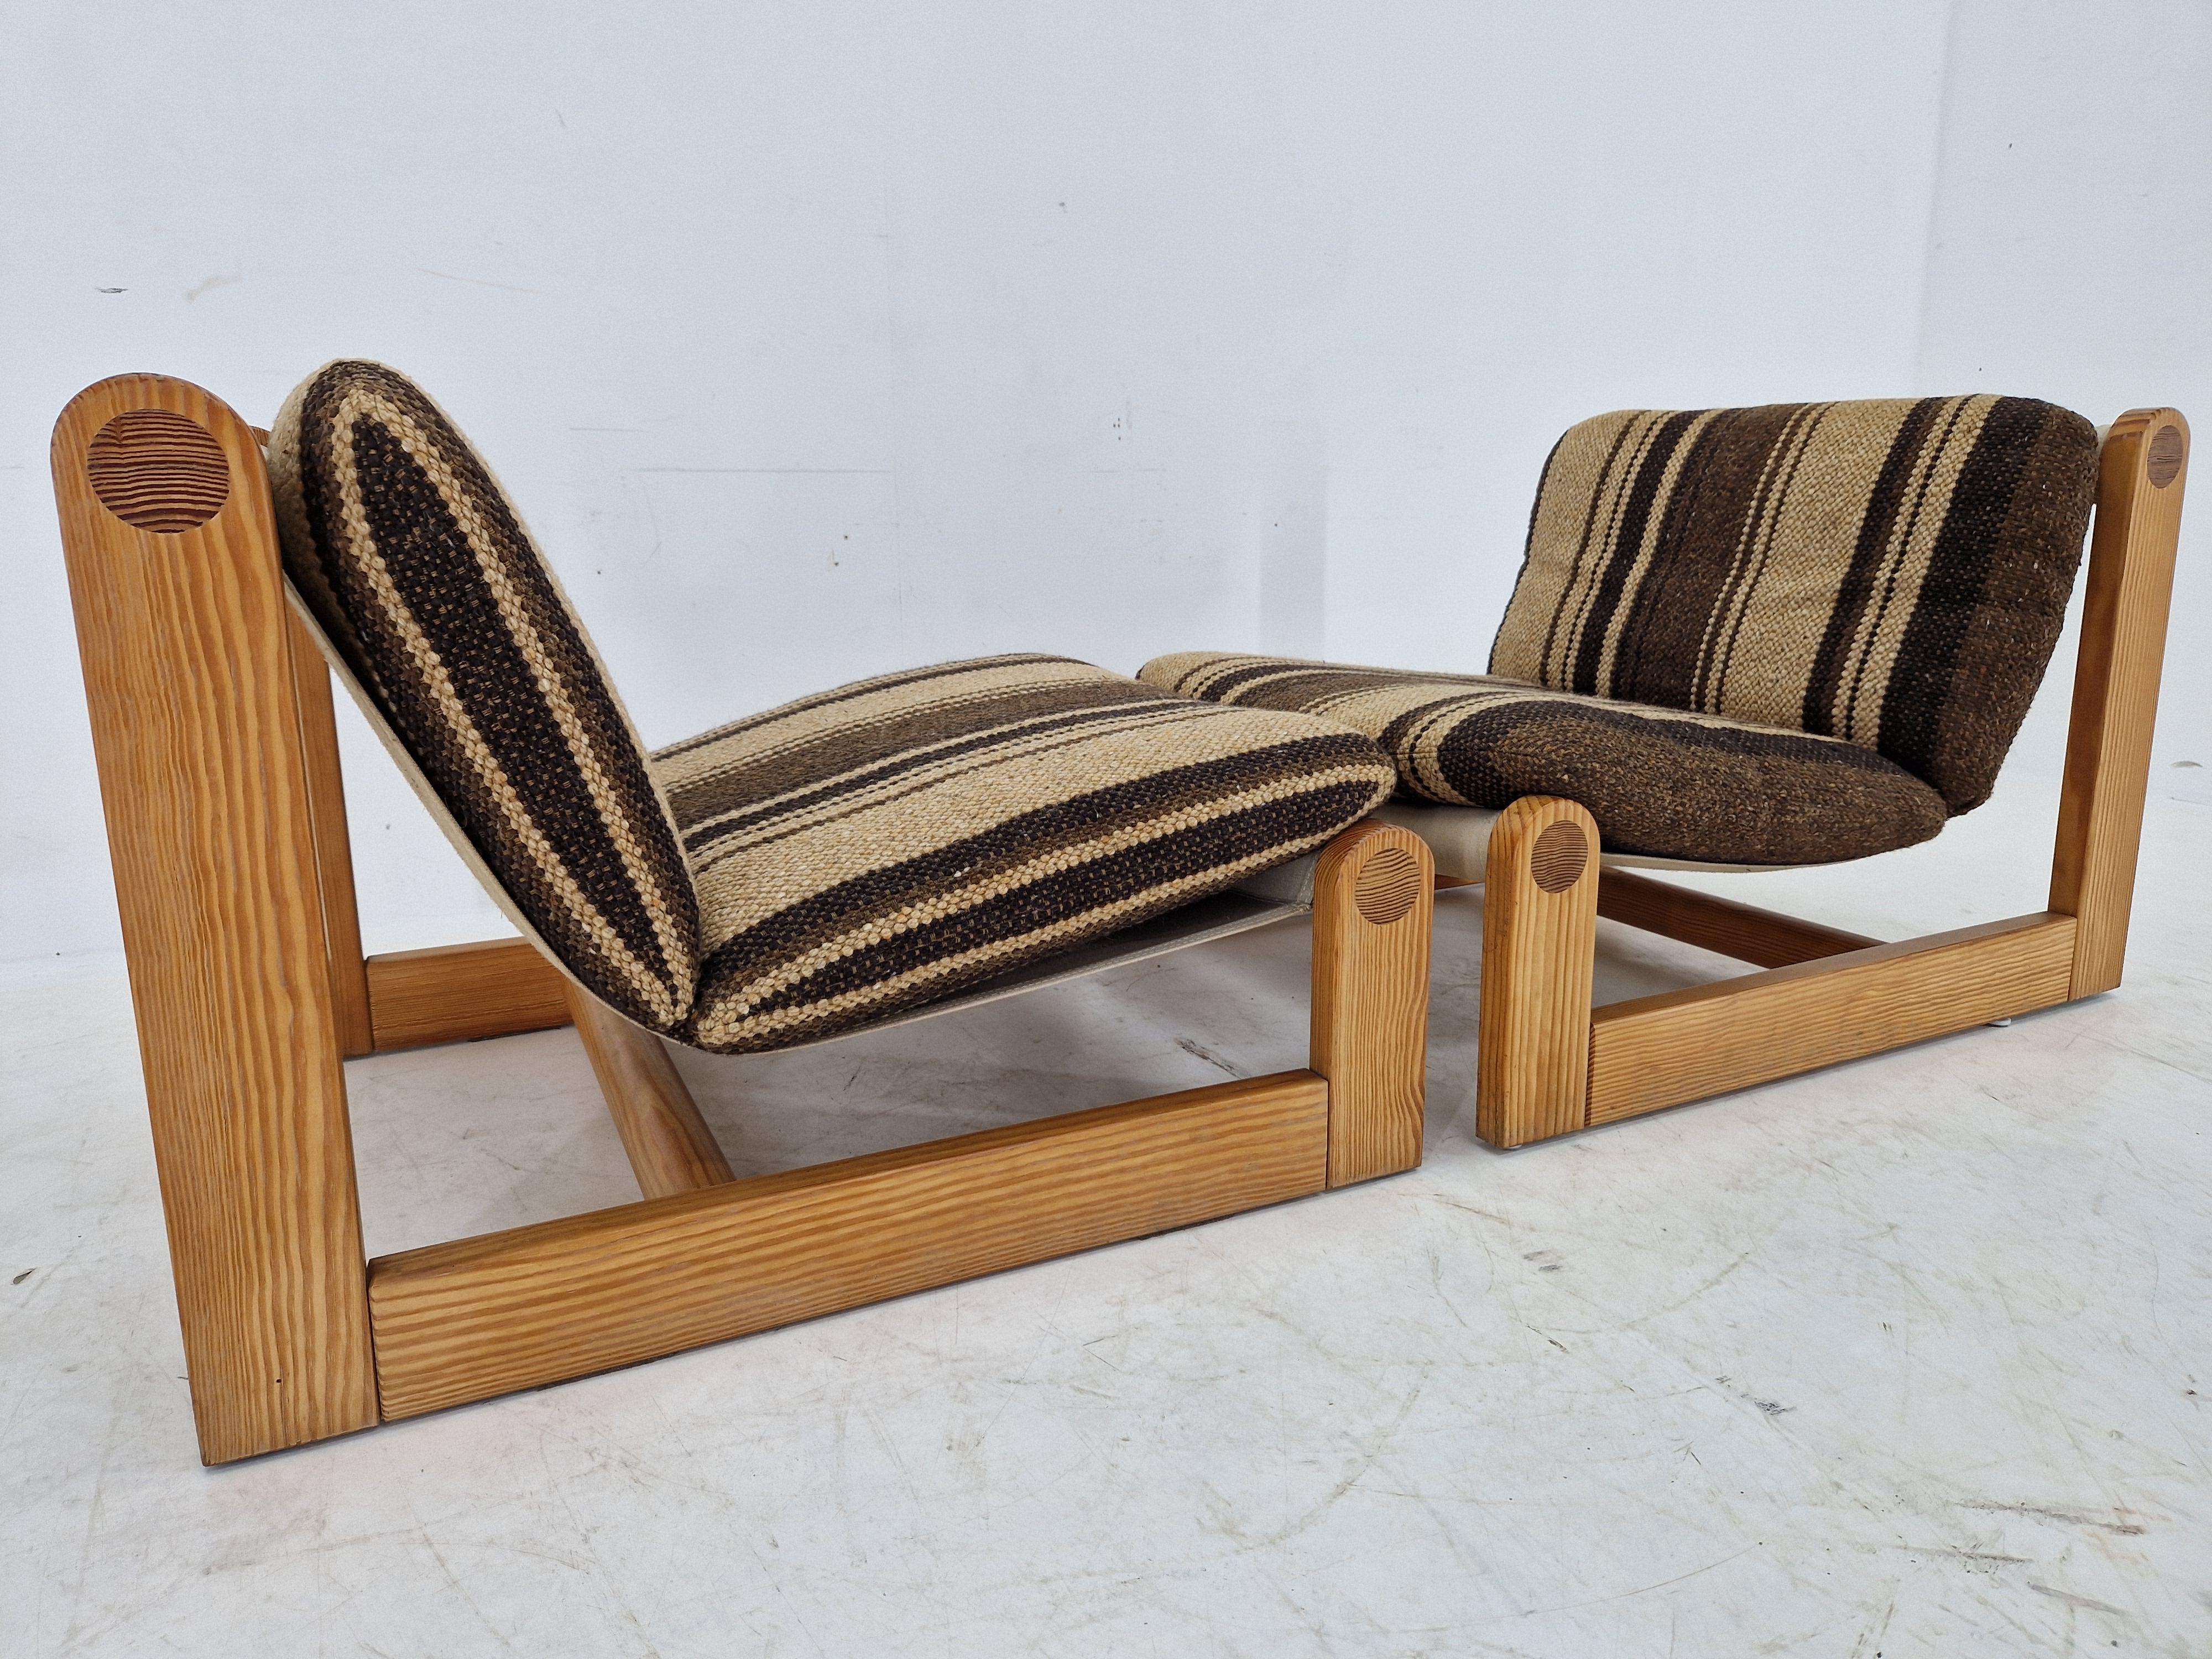 Pair of Midcentury Rare Lounge Chairs Pine Wood, Denmark, 1960s For Sale 1